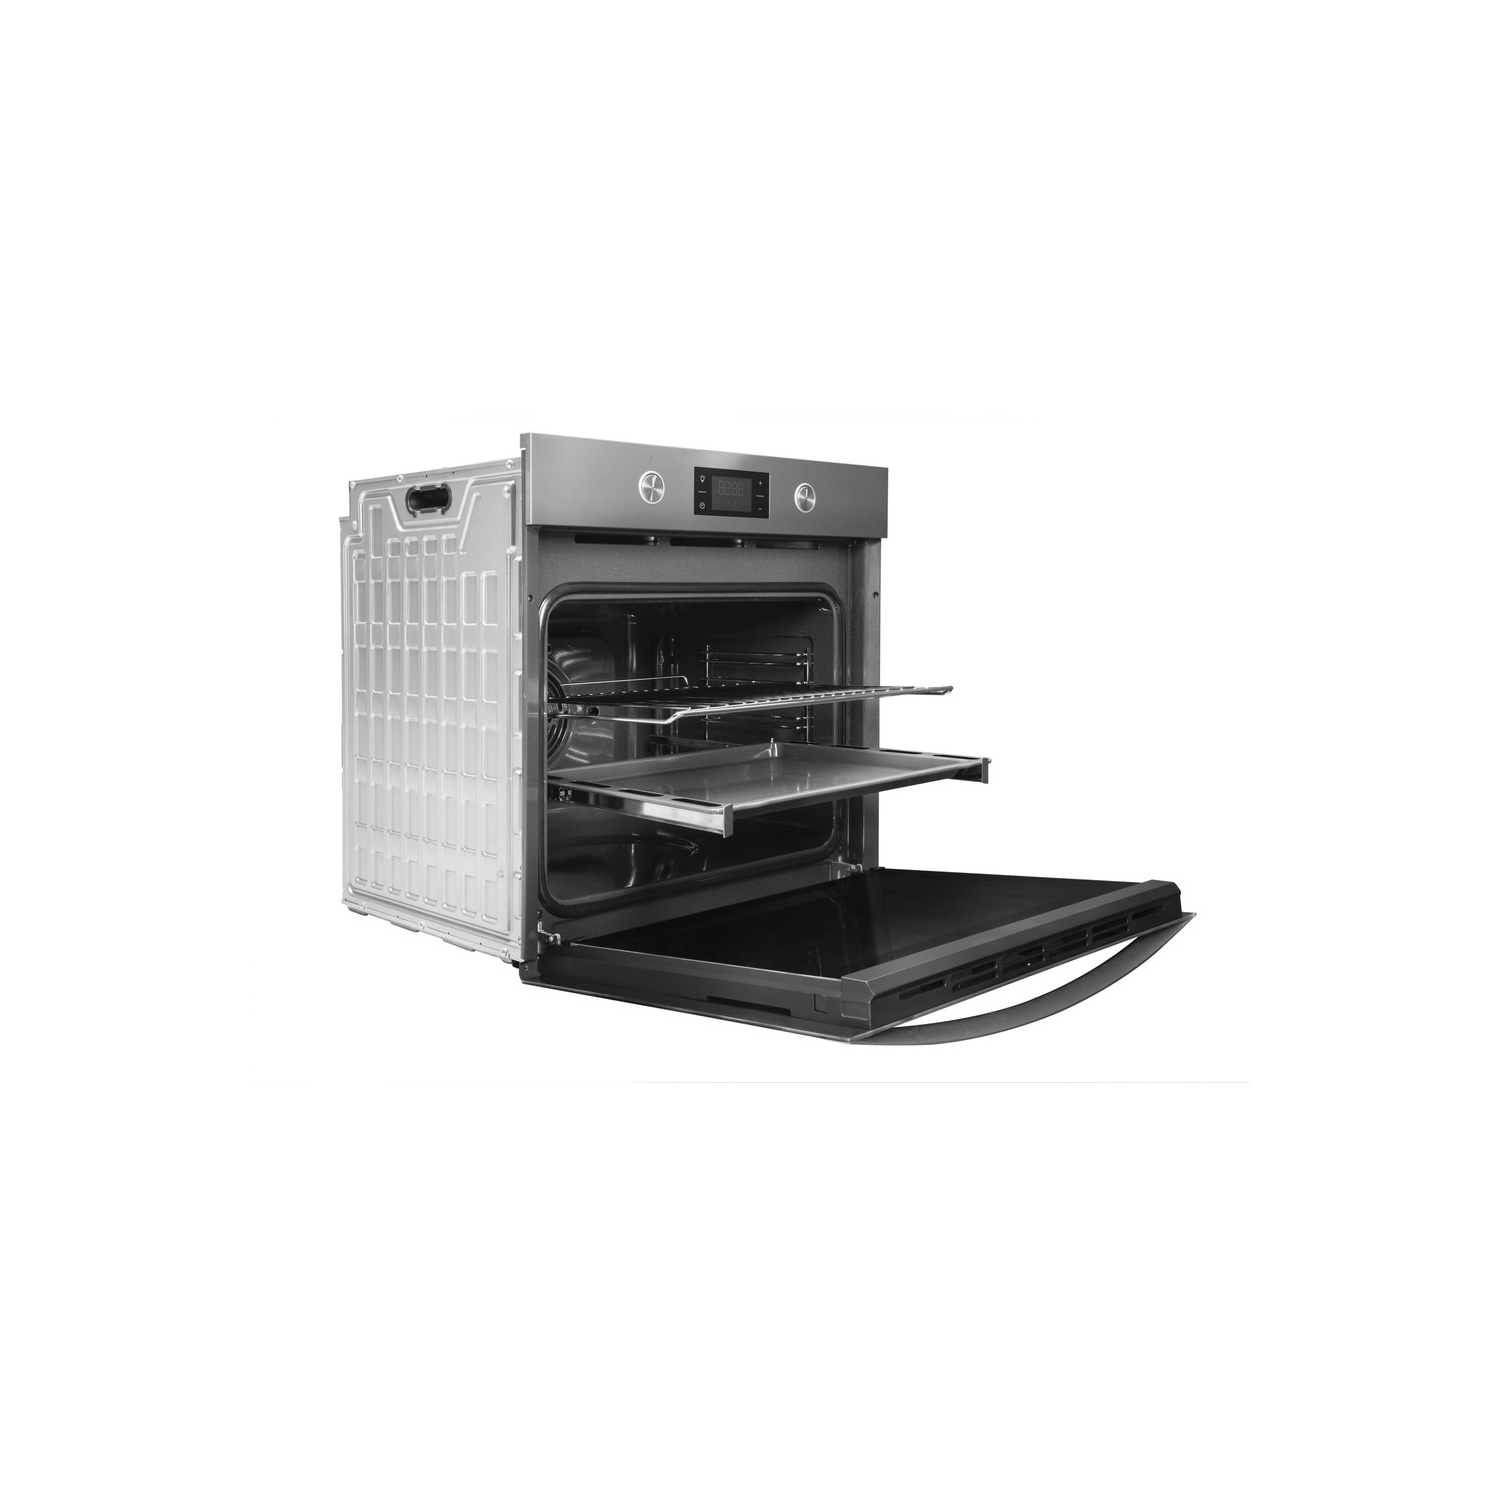 Indesit Built In Electric Single Oven - Stainless Steel - A+ Rated - 5